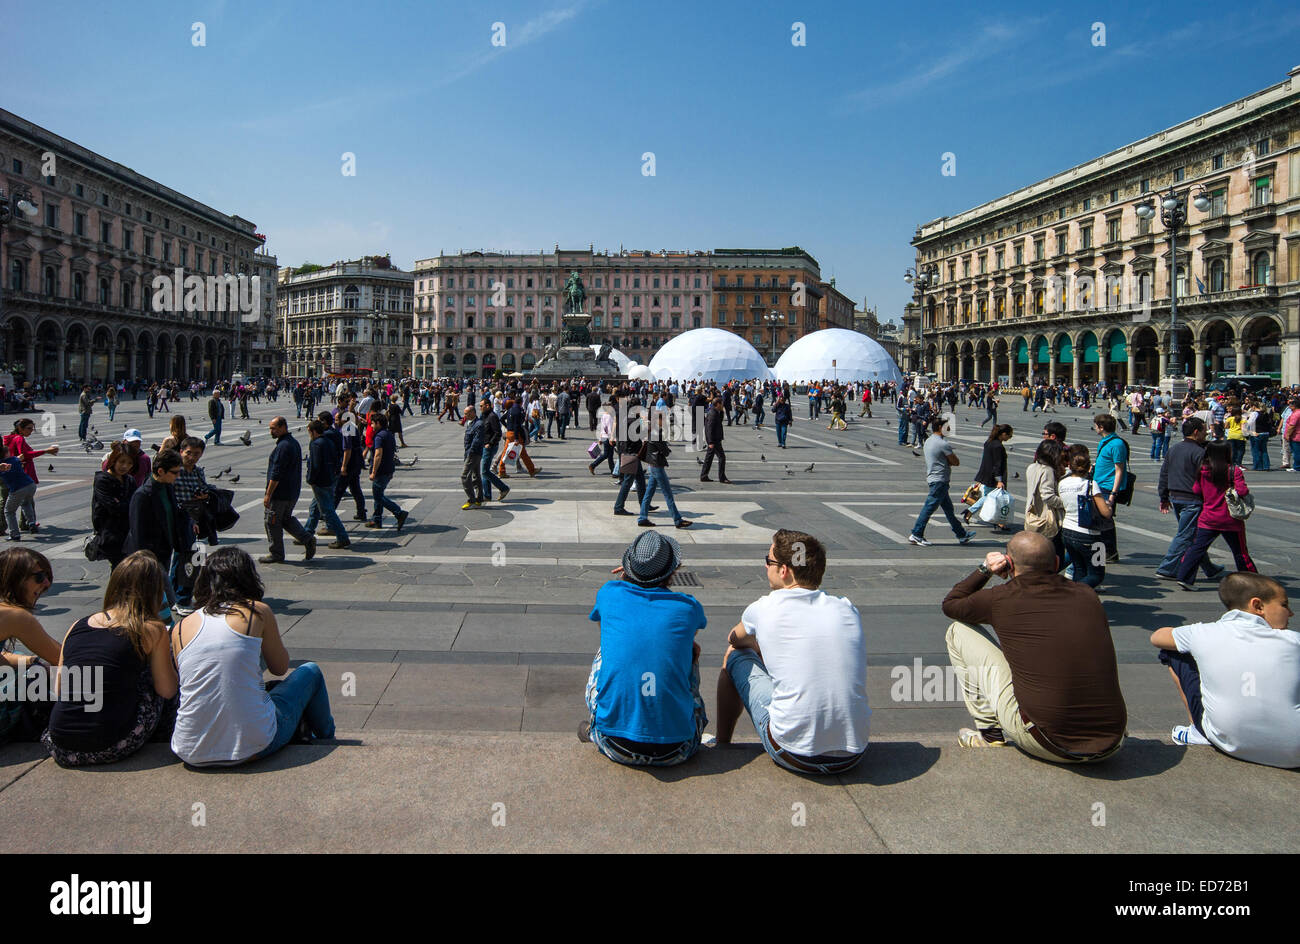 Italy, Lombardy, Milan, people in Piazza del Duomo Stock Photo